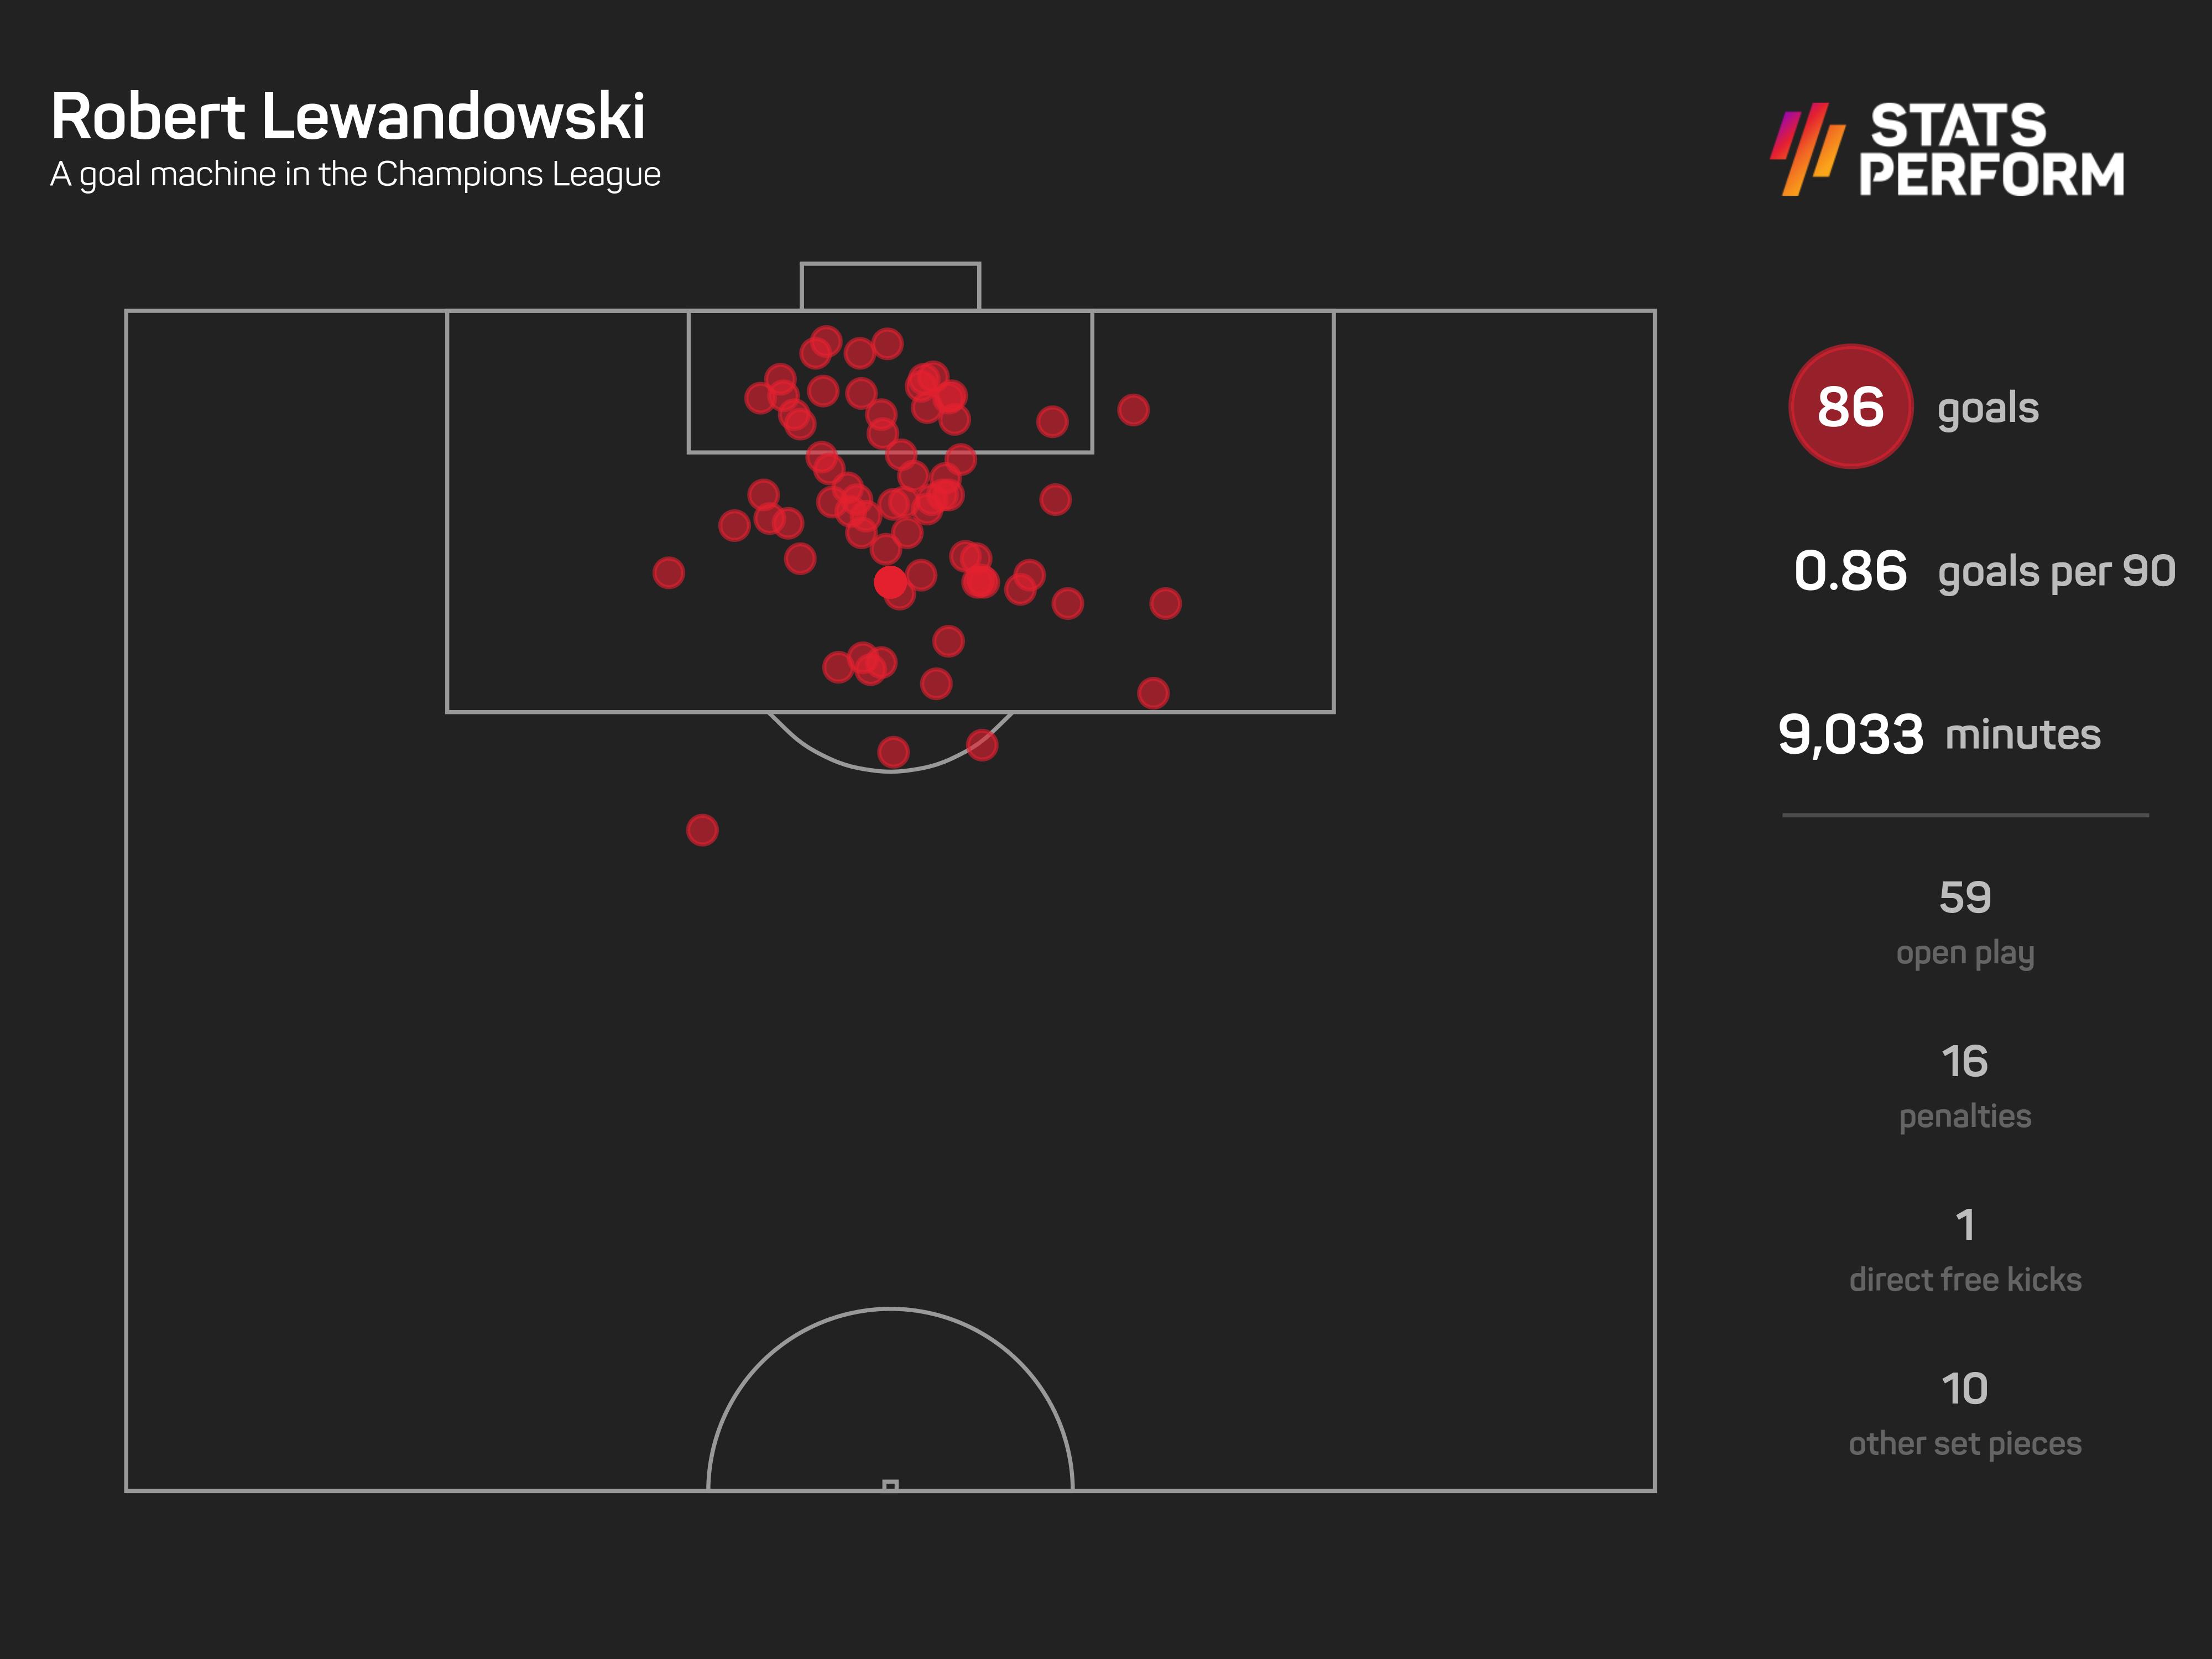 Few have been able to match Robert Lewandowski's efforts in Europe